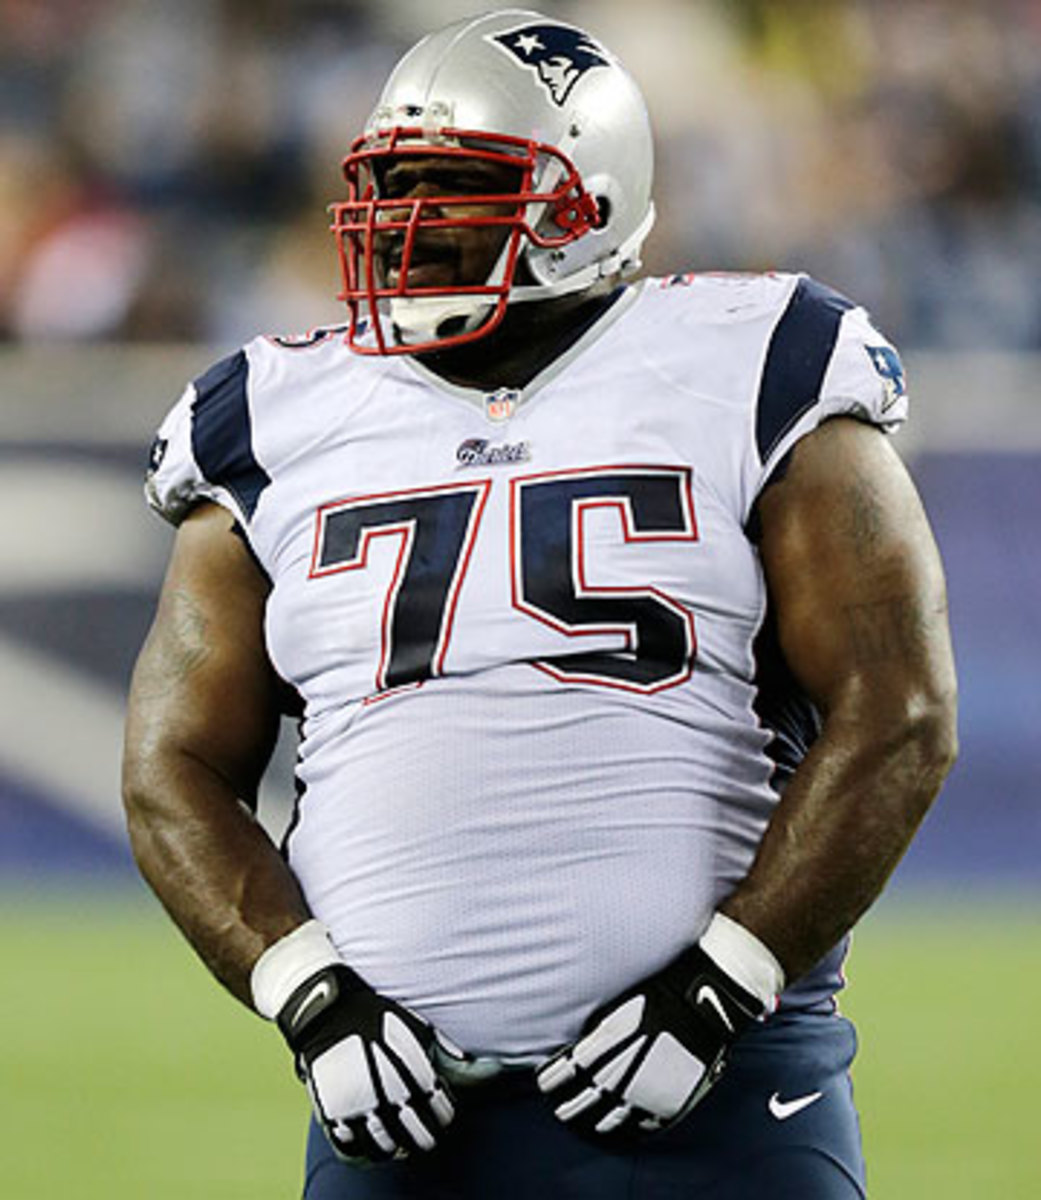 The Patriots are counting heavily on Vince Wilfork, 32 years old and coming off an Achilles injury. (Charles Krupa/AP)